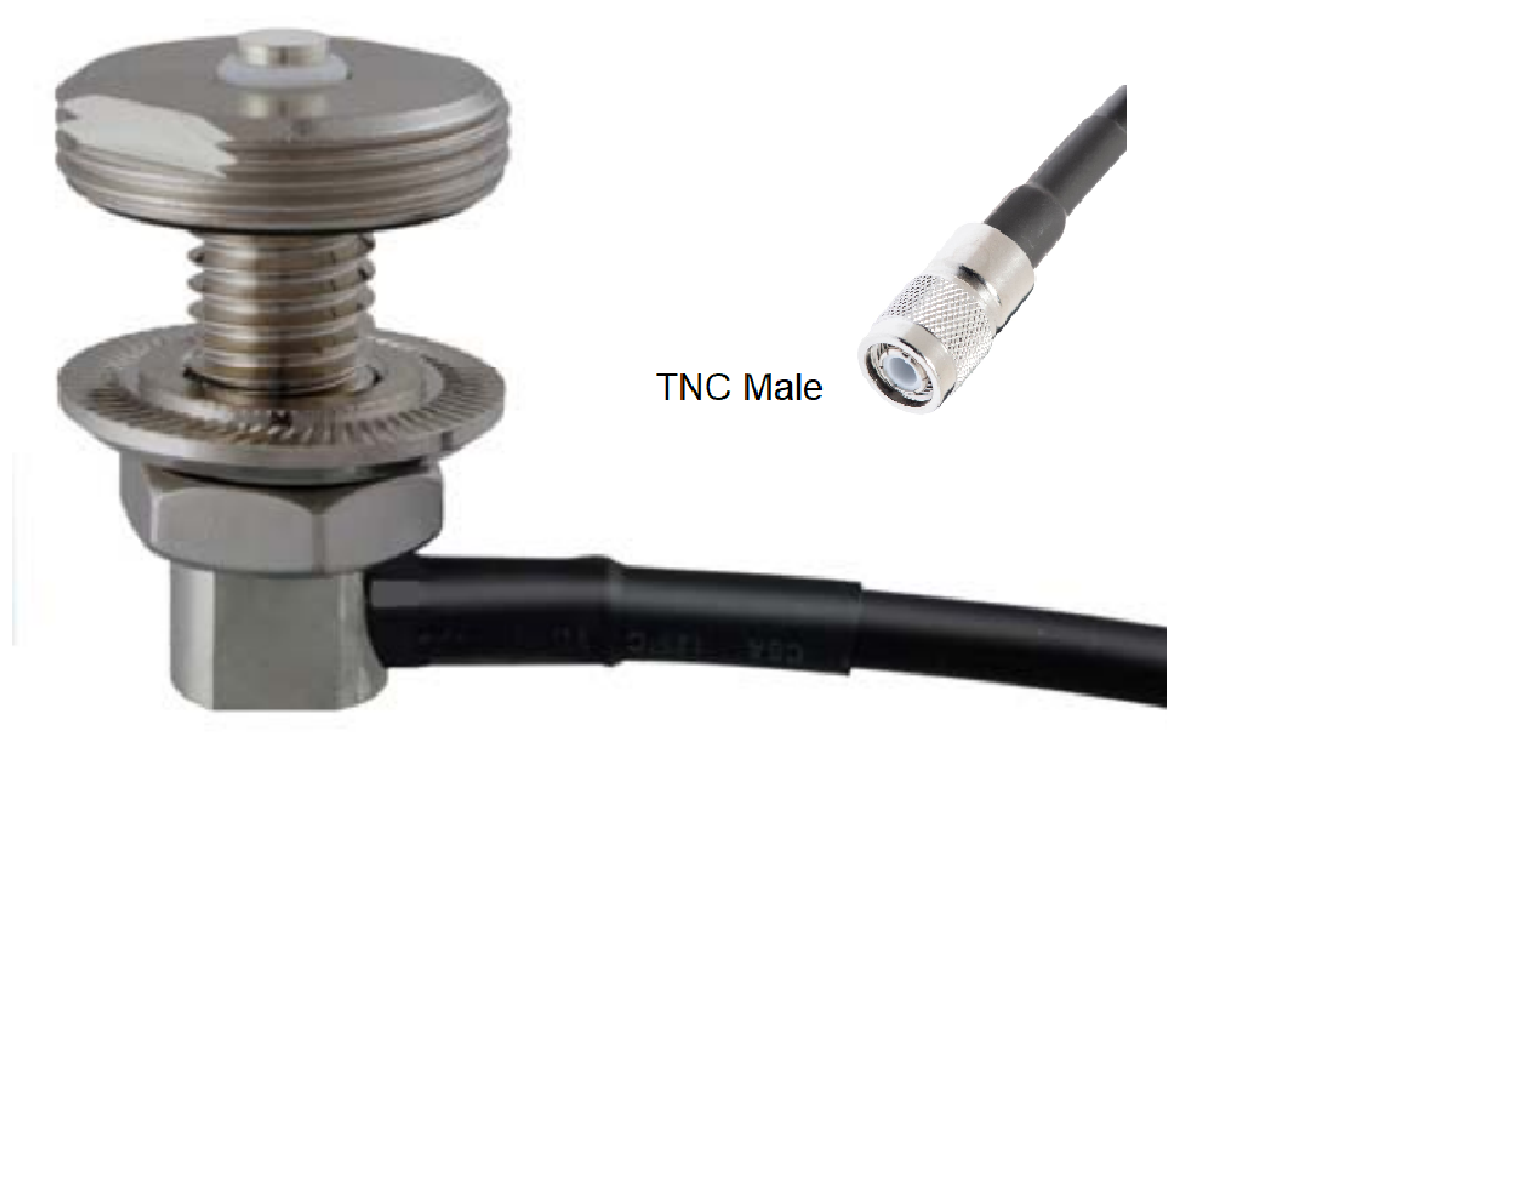 Adjustable NMO Antenna Mount for Thick Surface Up To 1/2 Inch. 17 ft. Low Loss 195 Cable & TNC-Male. RNMOV-195-STM-C-17I